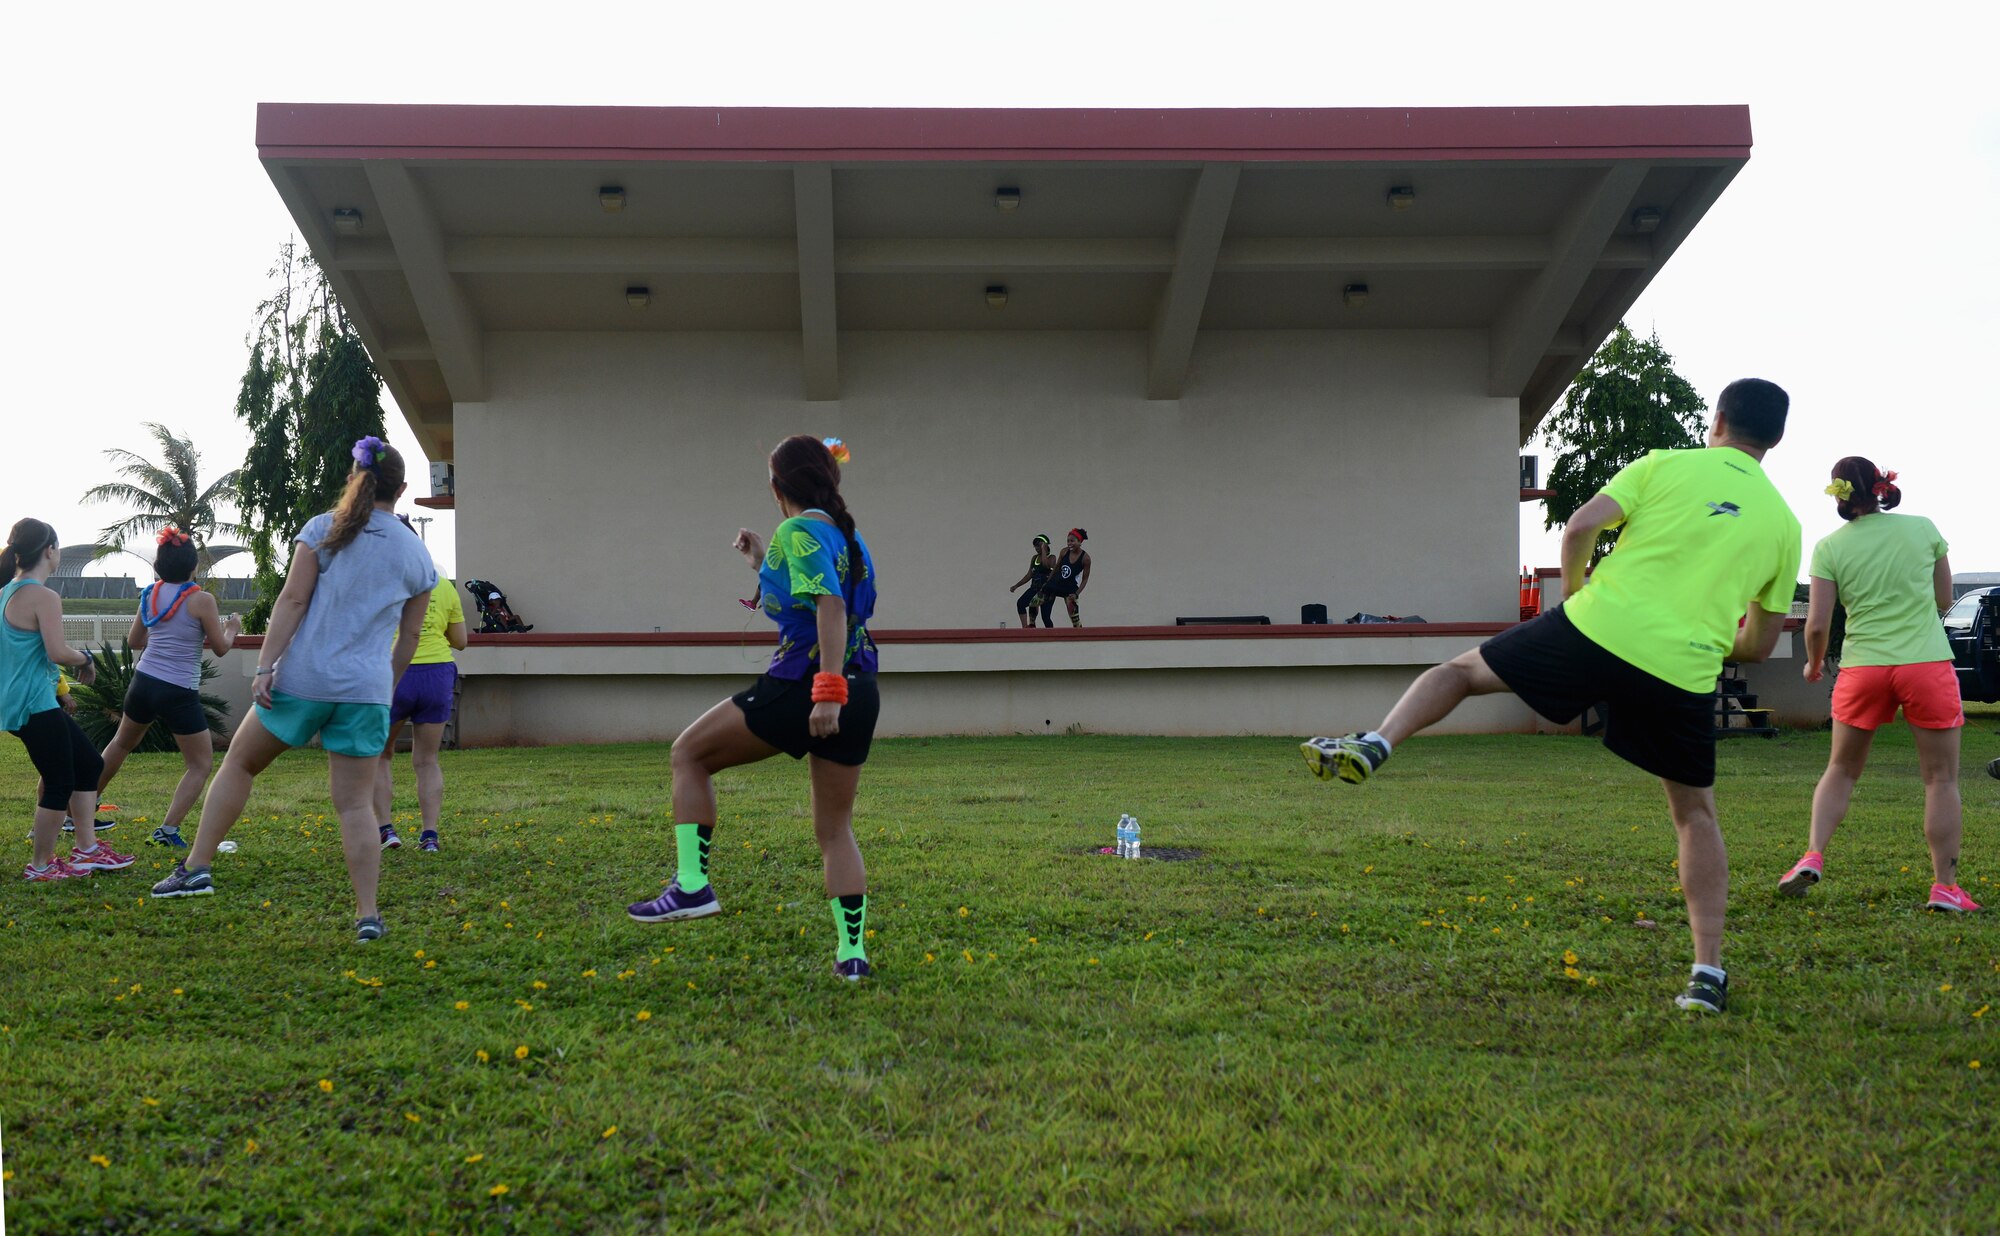 Runners participate in a warm-up before the Reggae 5K run July 16, 2015, at Andersen Air Force Base, Guam. Approximately 80 participants competed in the reggae-themed 5K run organized by the 36th Force Support Squadron. (U.S. Air Force photo by Airman 1st Class Arielle Vasquez/Released)